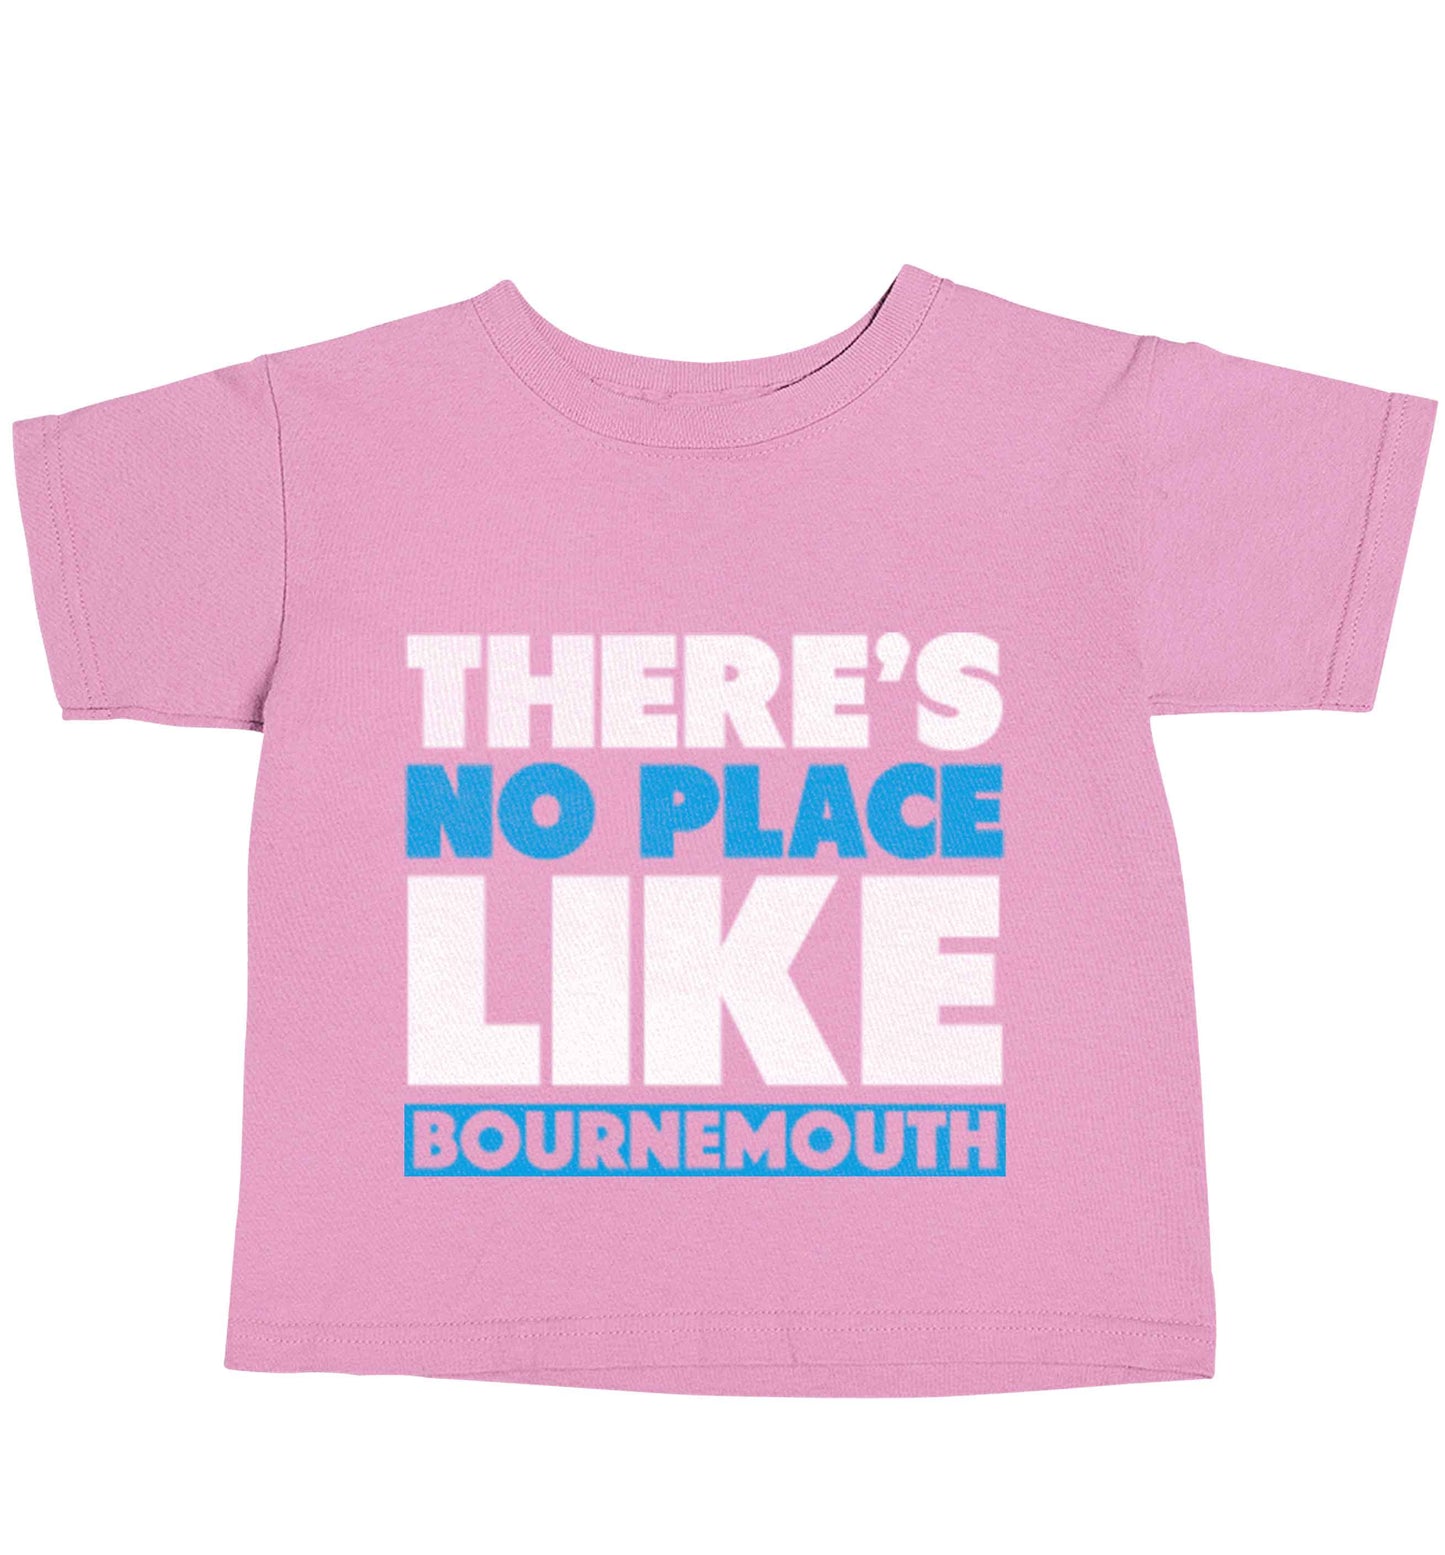 There's no place like Bournemouth light pink baby toddler Tshirt 2 Years